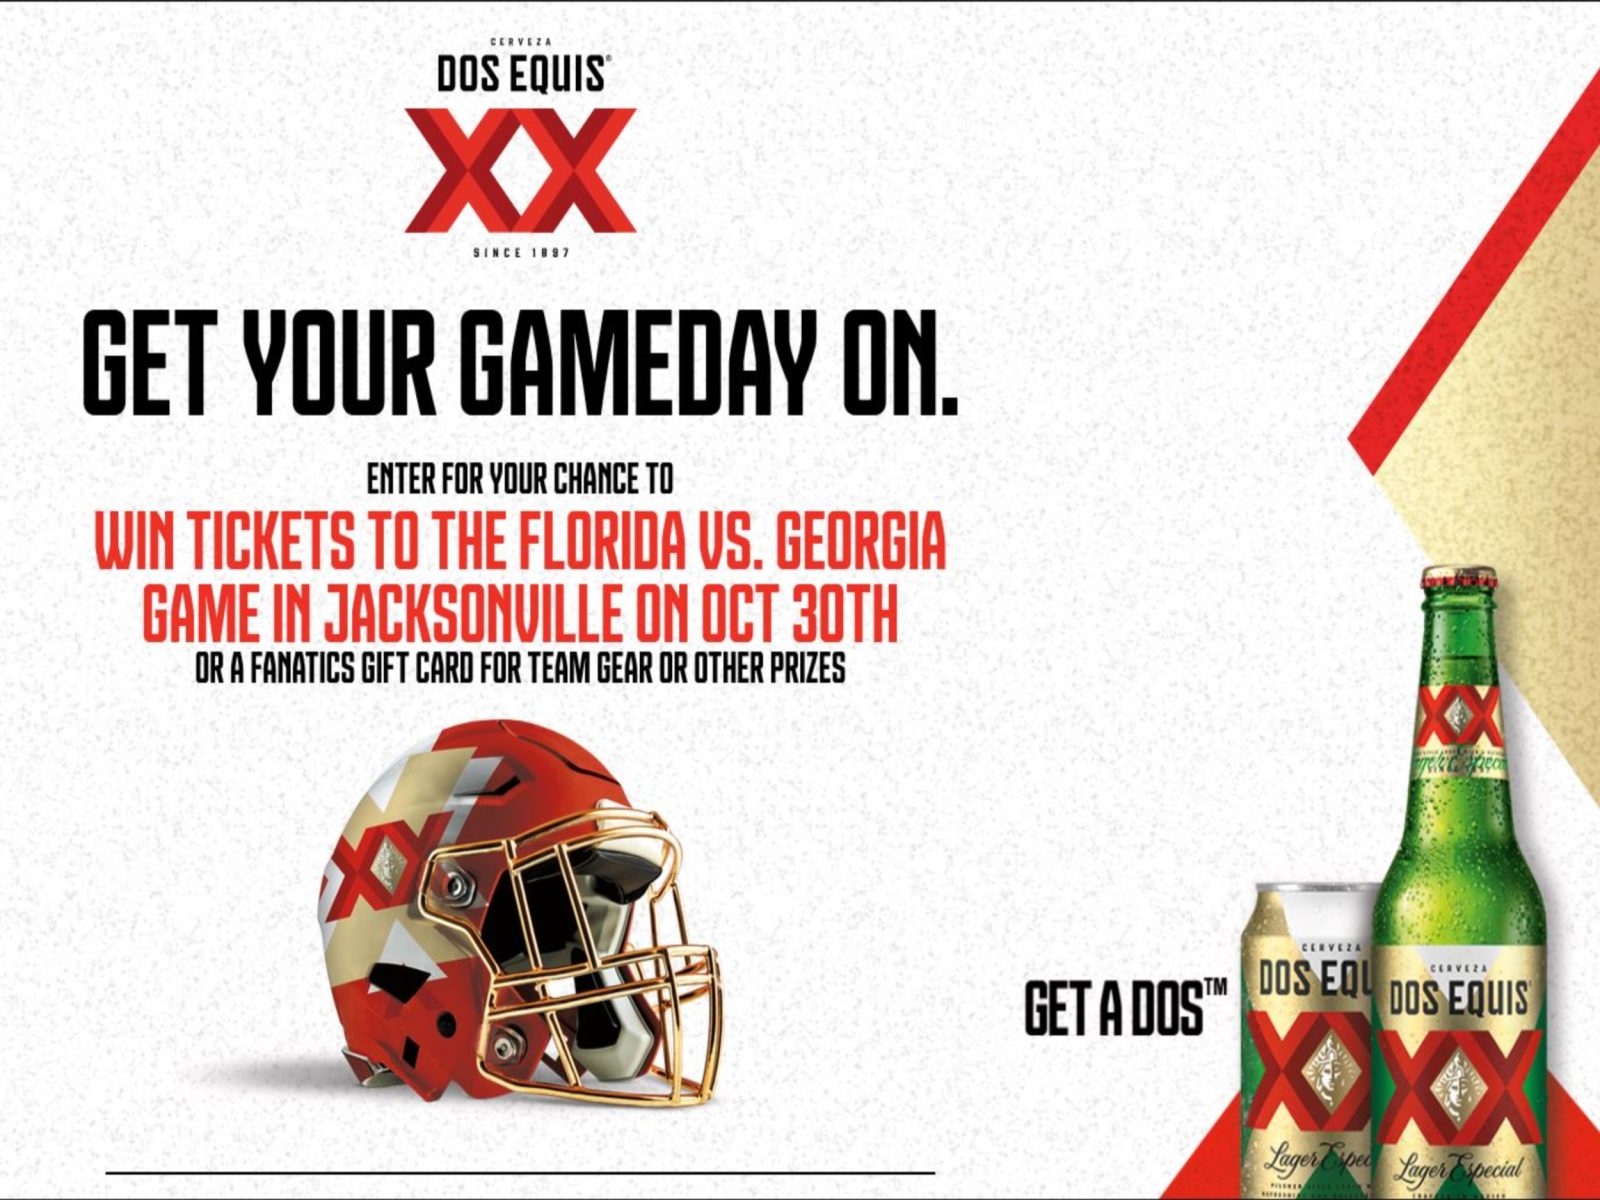 Don’t Forget To Enter The Dos Equis® Florida vs Georgia Rivalry Sweepstakes